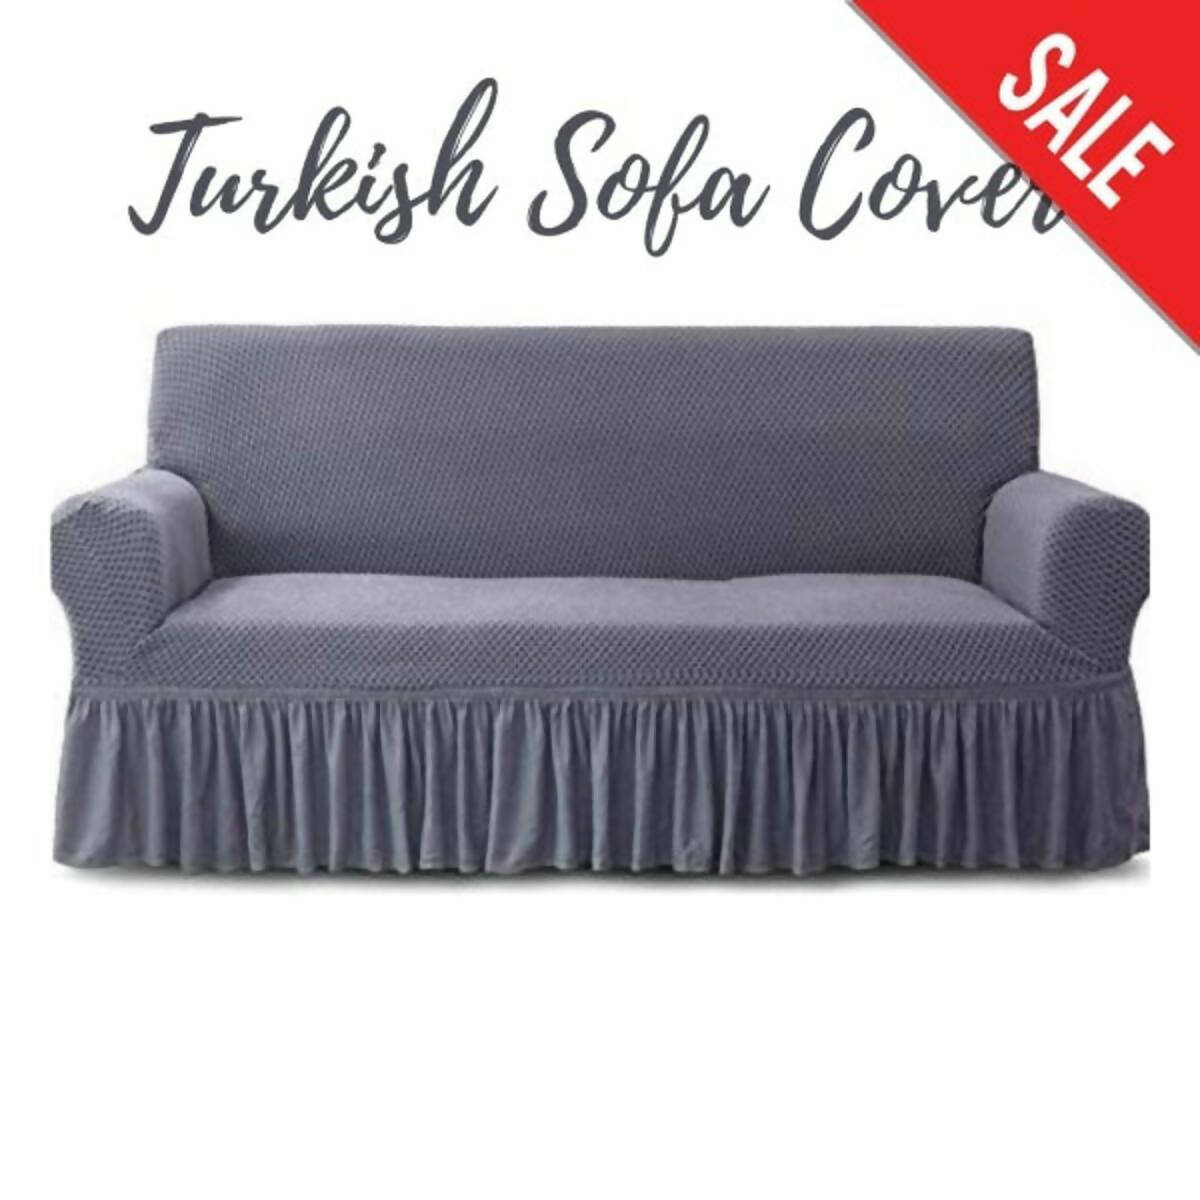 Frill sofa cover mash jersey (standard size)